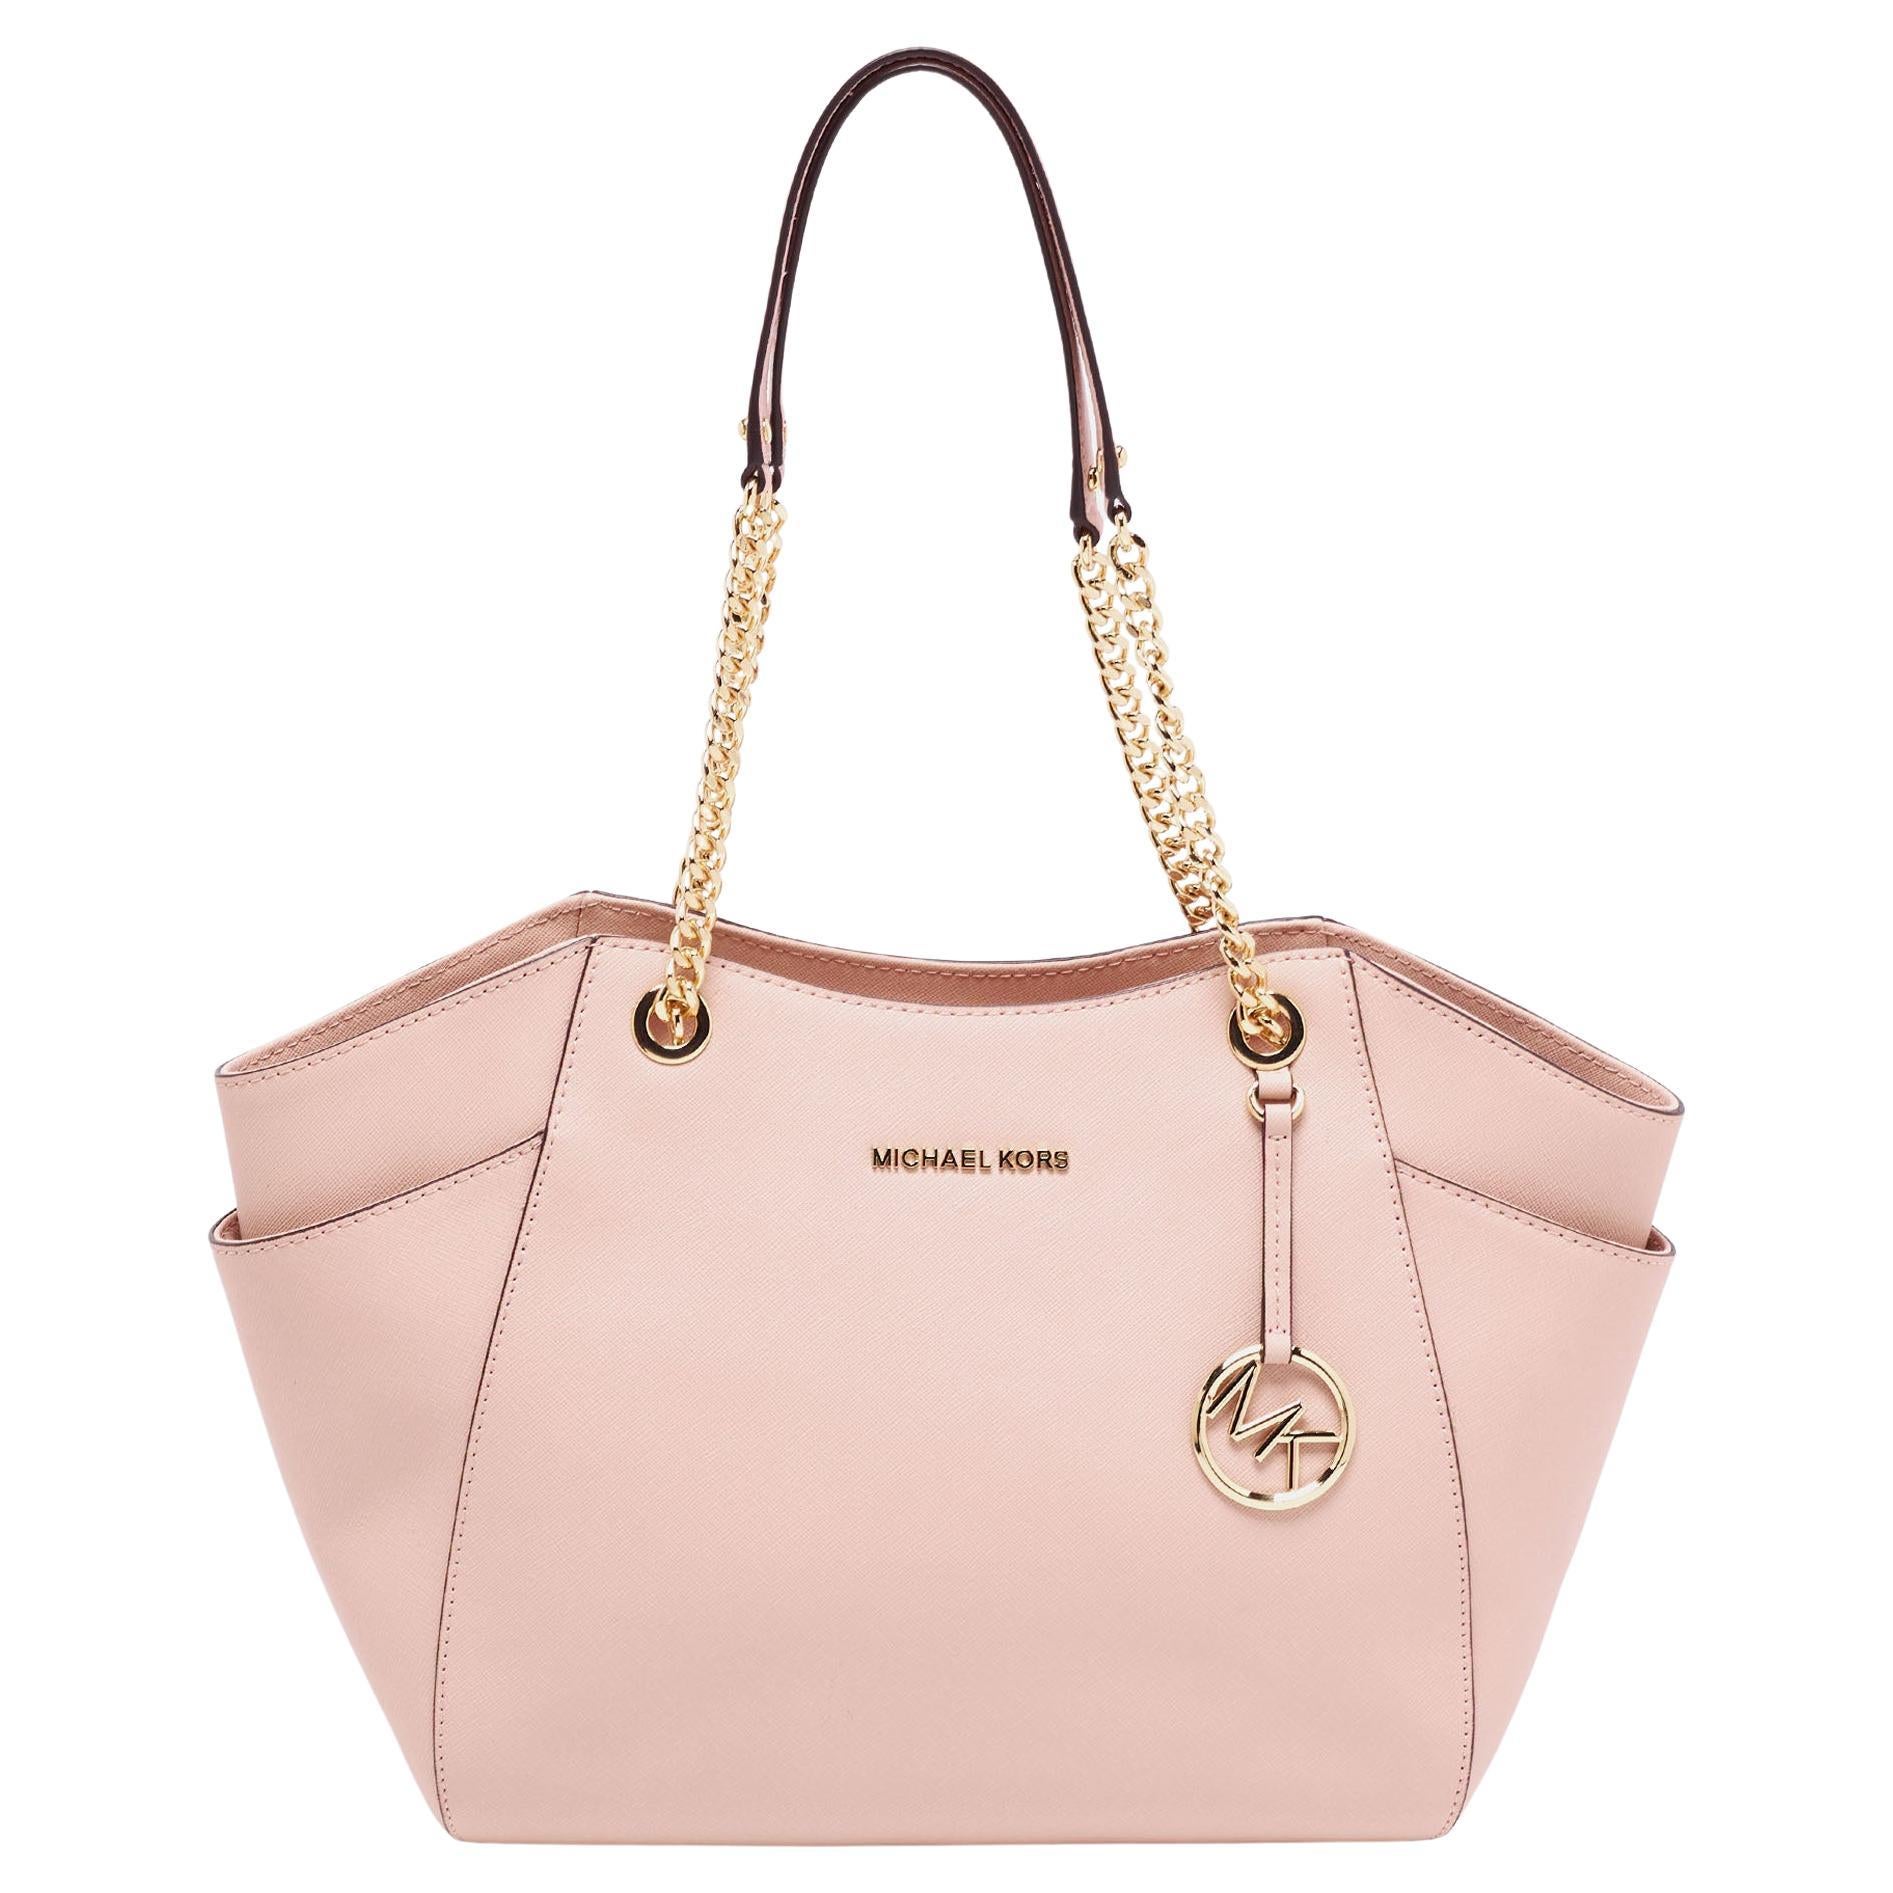 Michael Kors Tote Bags | House of Fraser